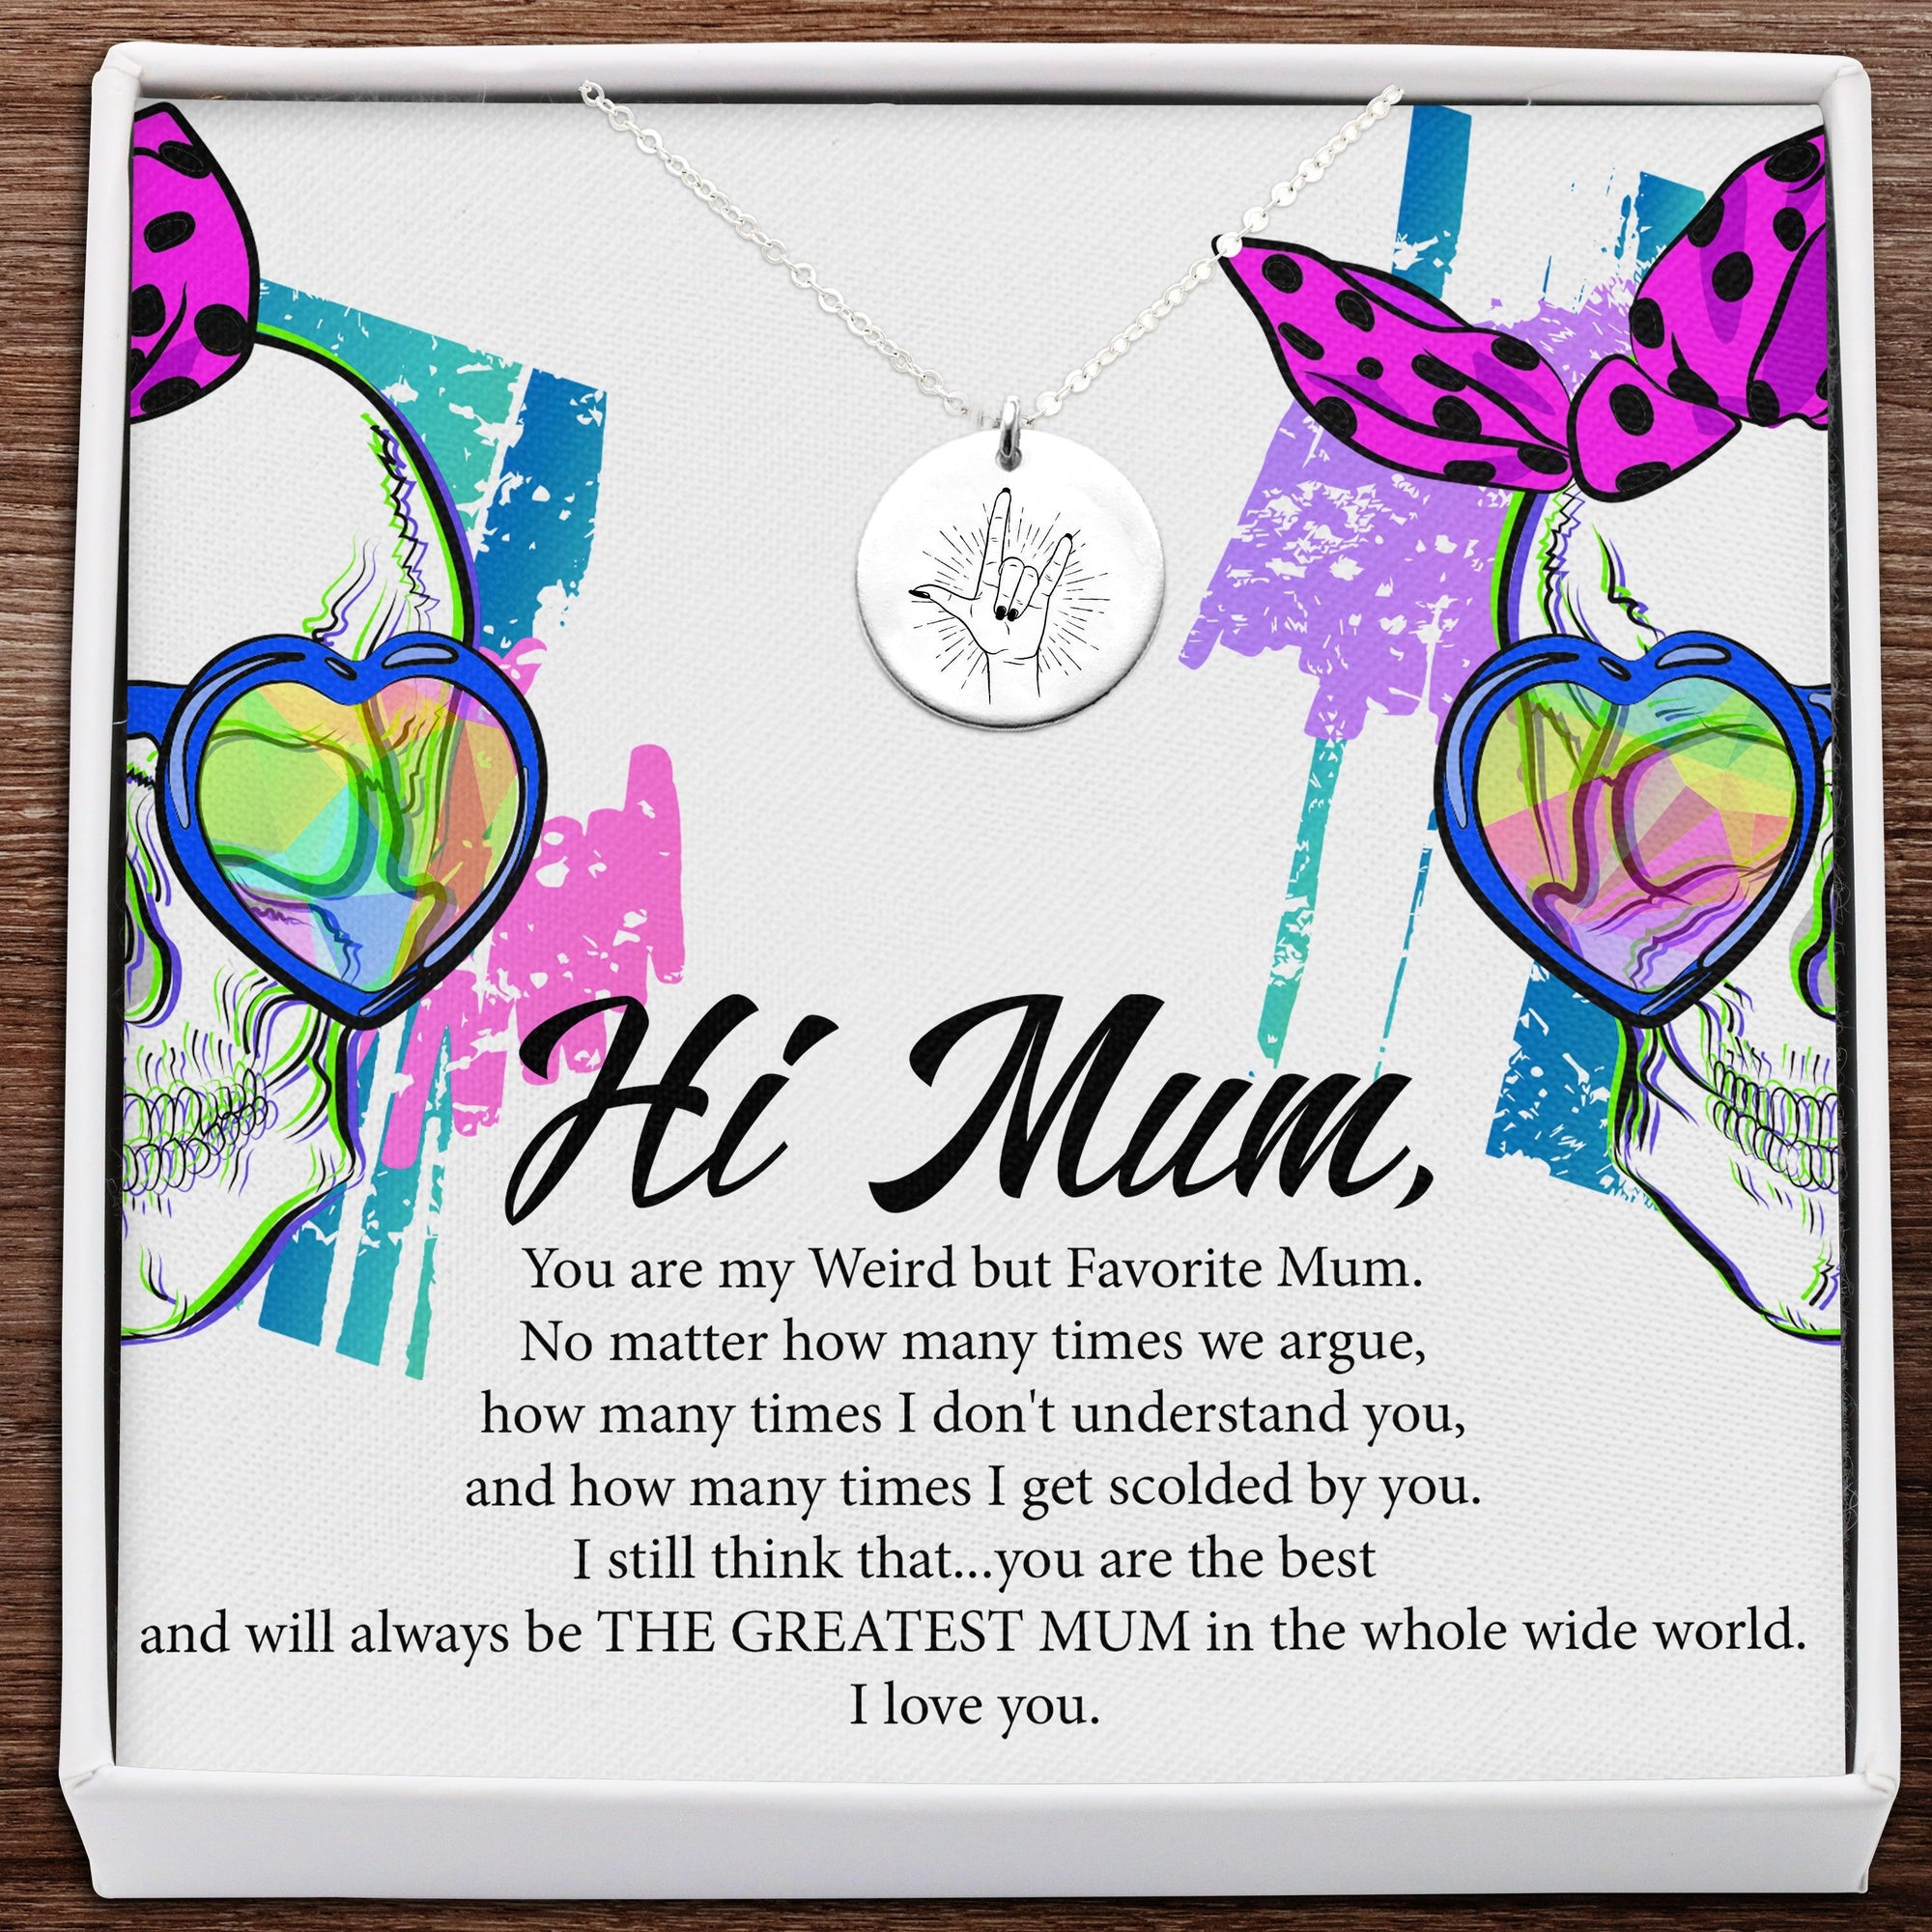 Round Necklace - To My Mum - The Greatest Mum - Augnev19001 - Gifts Holder